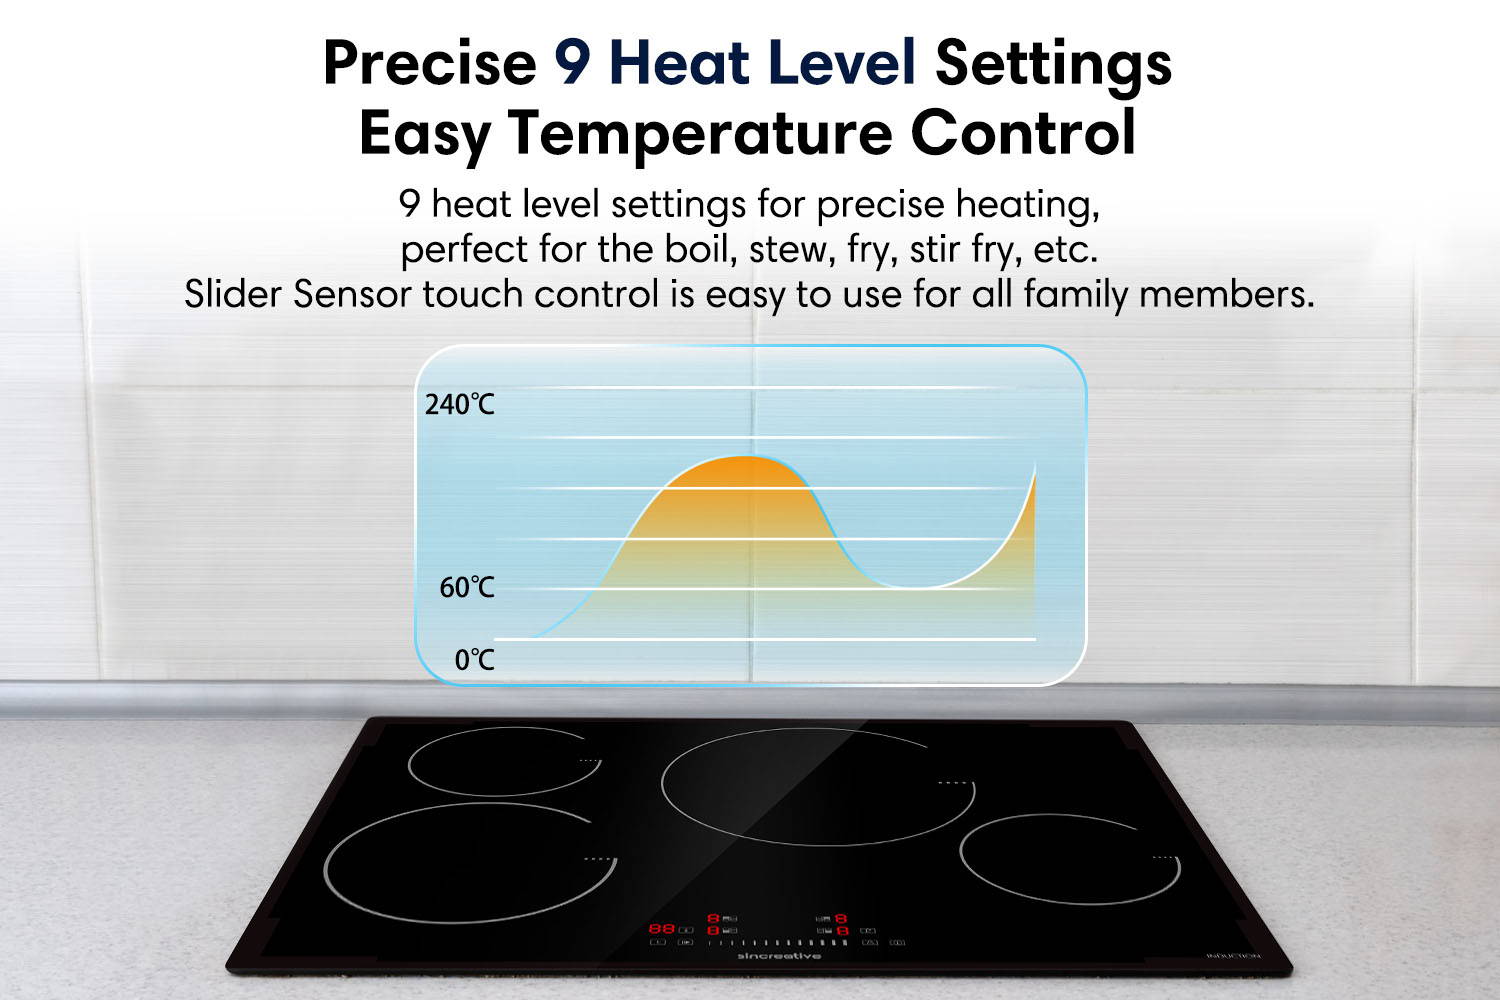 Precise 9 heat level settings easy temperature control 9 heat level settings for precise heating, perfect for the boil, stew, fry, stir fry, etc. Slider sensor touch control is easy to use for all family members.